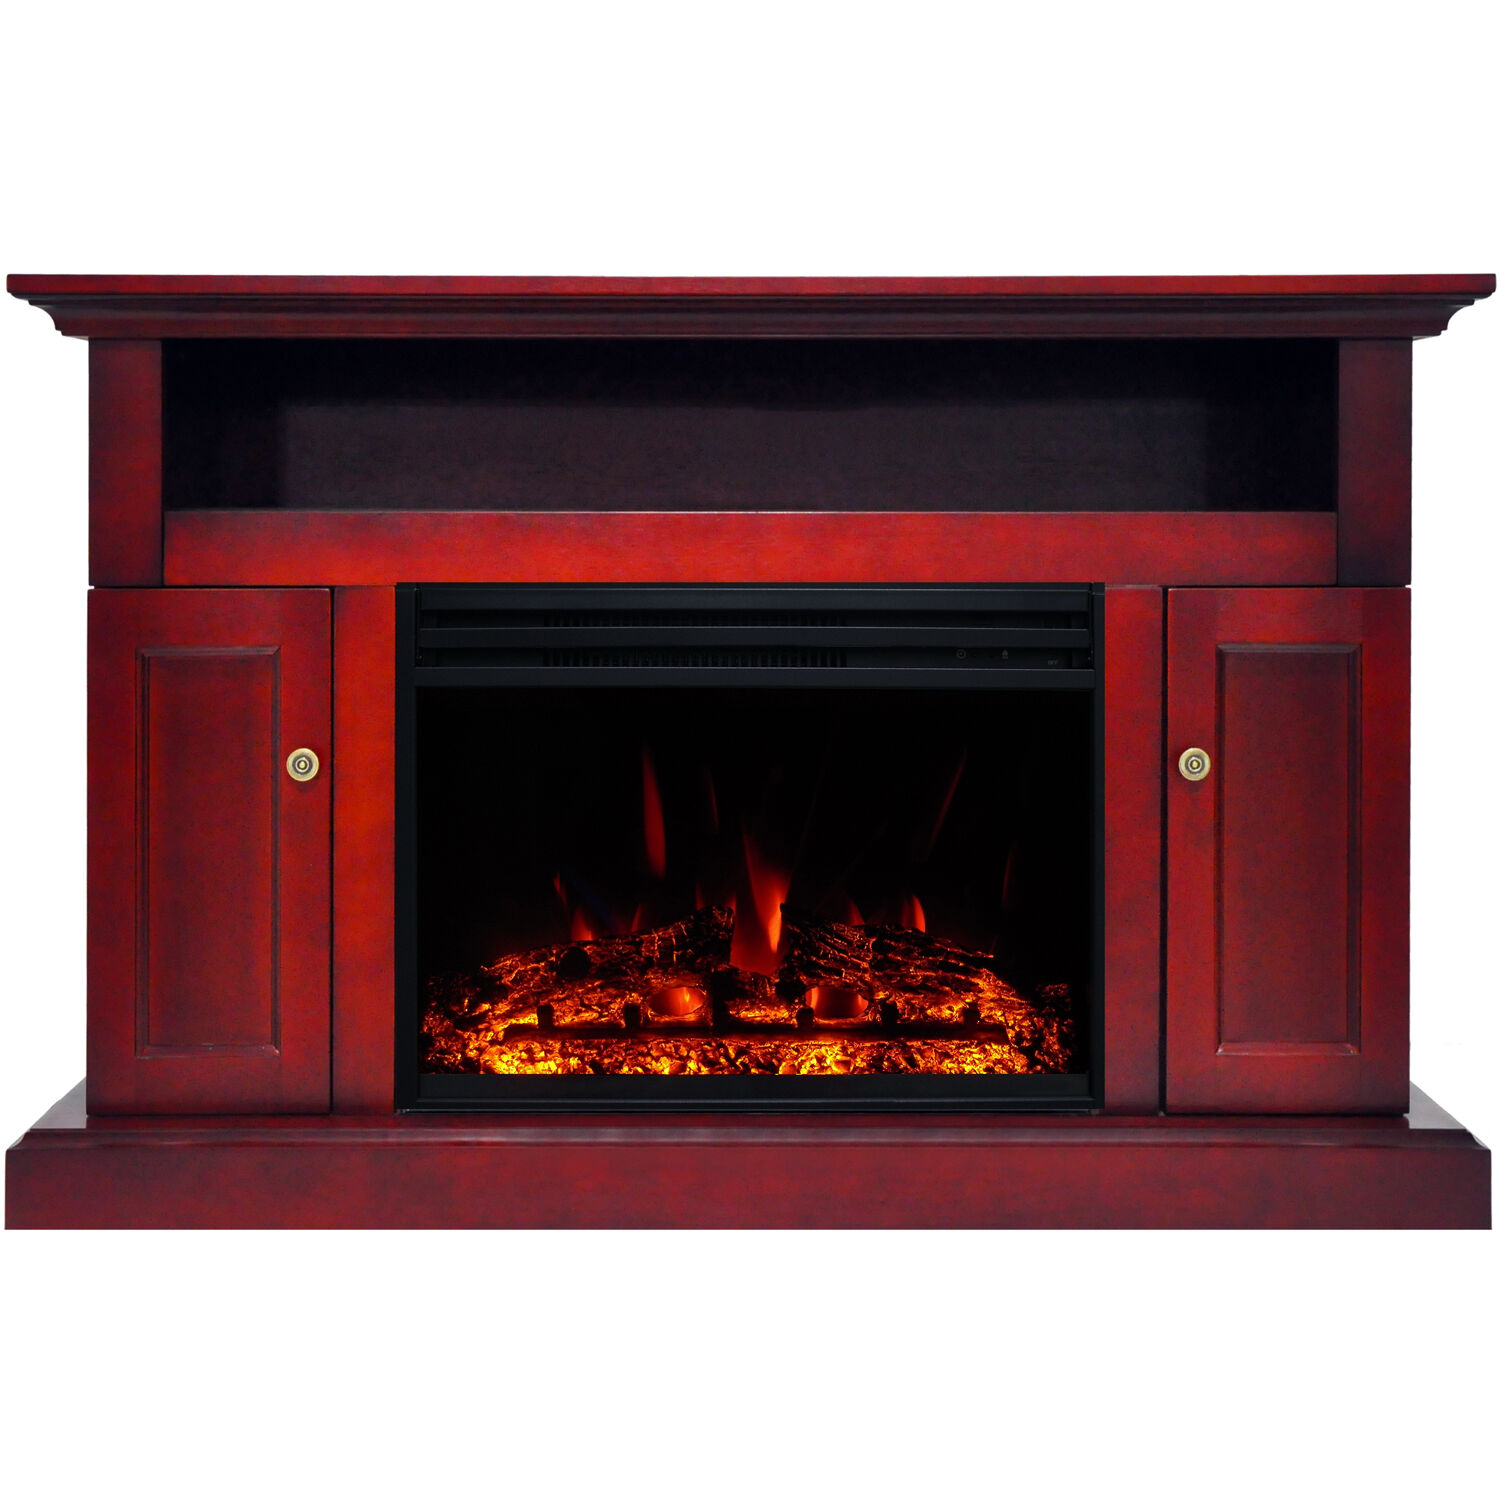 Hanover Kingsford Electric Fireplace Heater with Deep Log Display, Multi-color Flames and 47-In. Entertainment Stand in Cherry - image 1 of 10